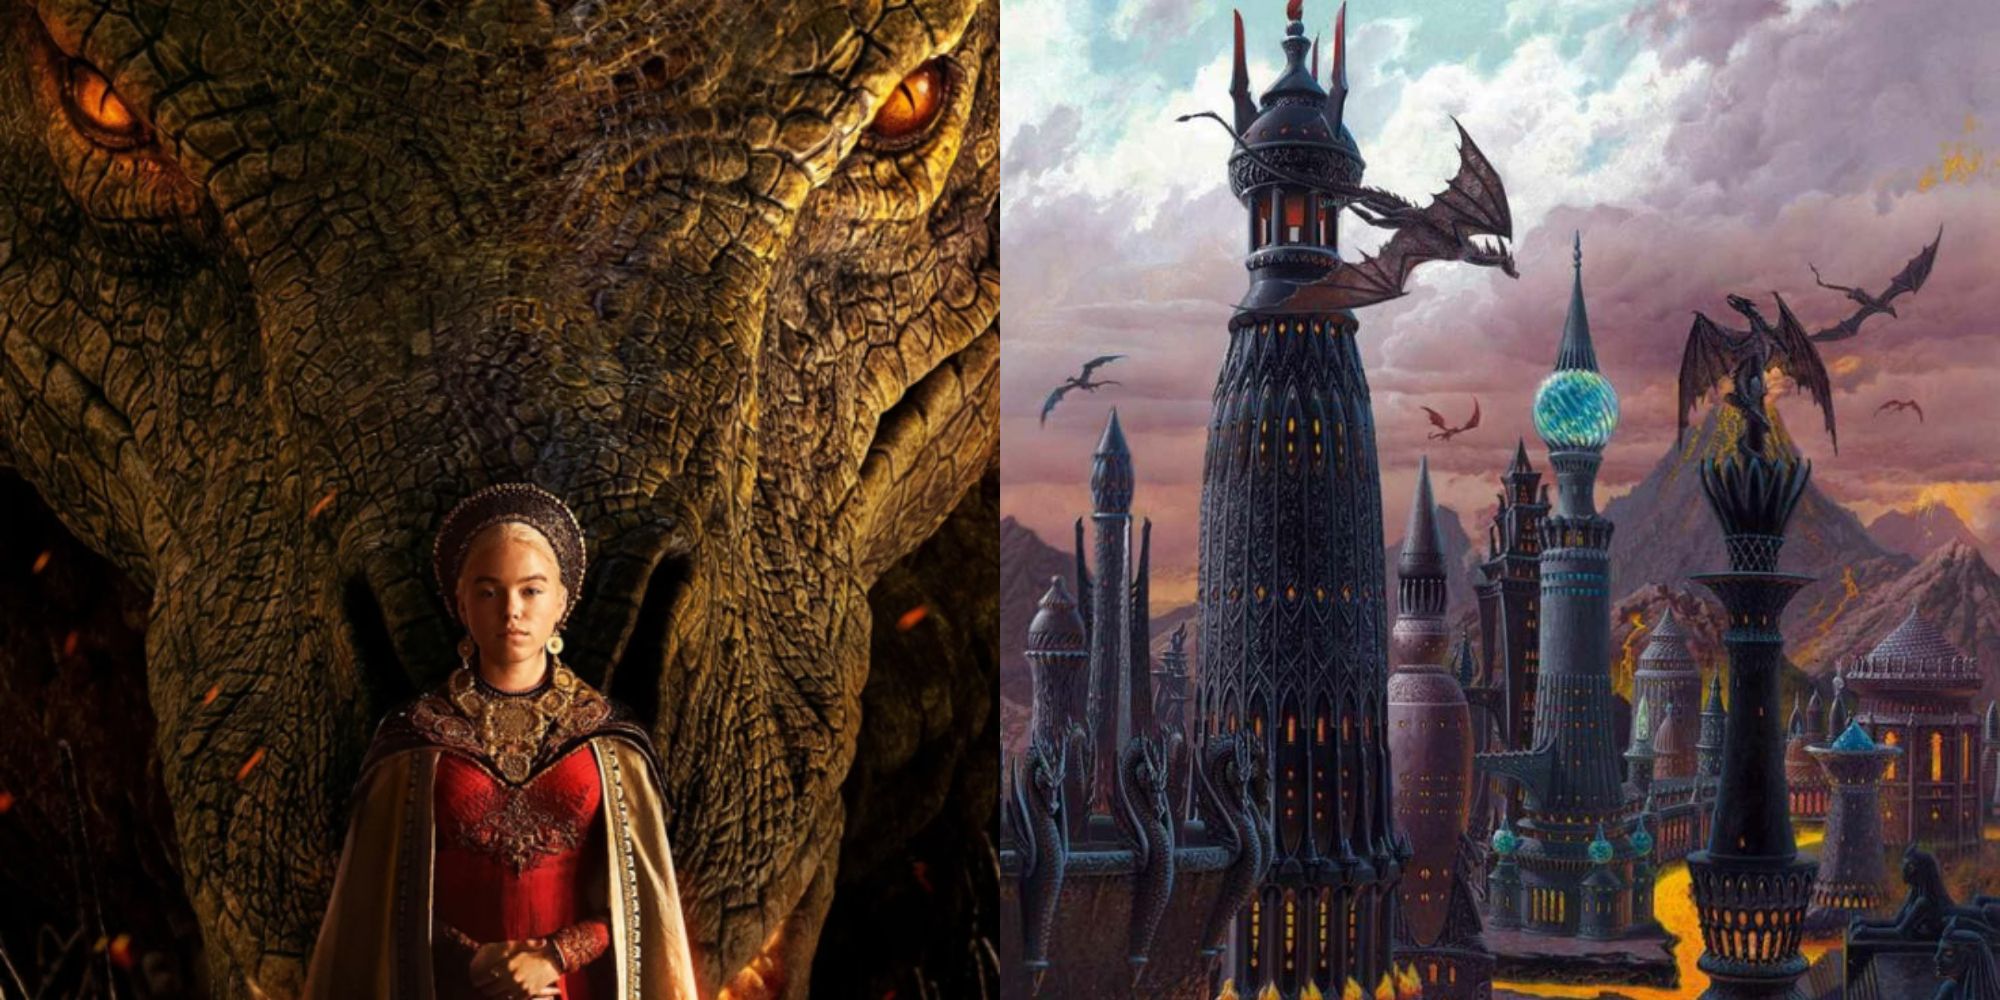 Split image showing the poster for House of the Dragon and artwork depicting dragons flying over Old Valyria.